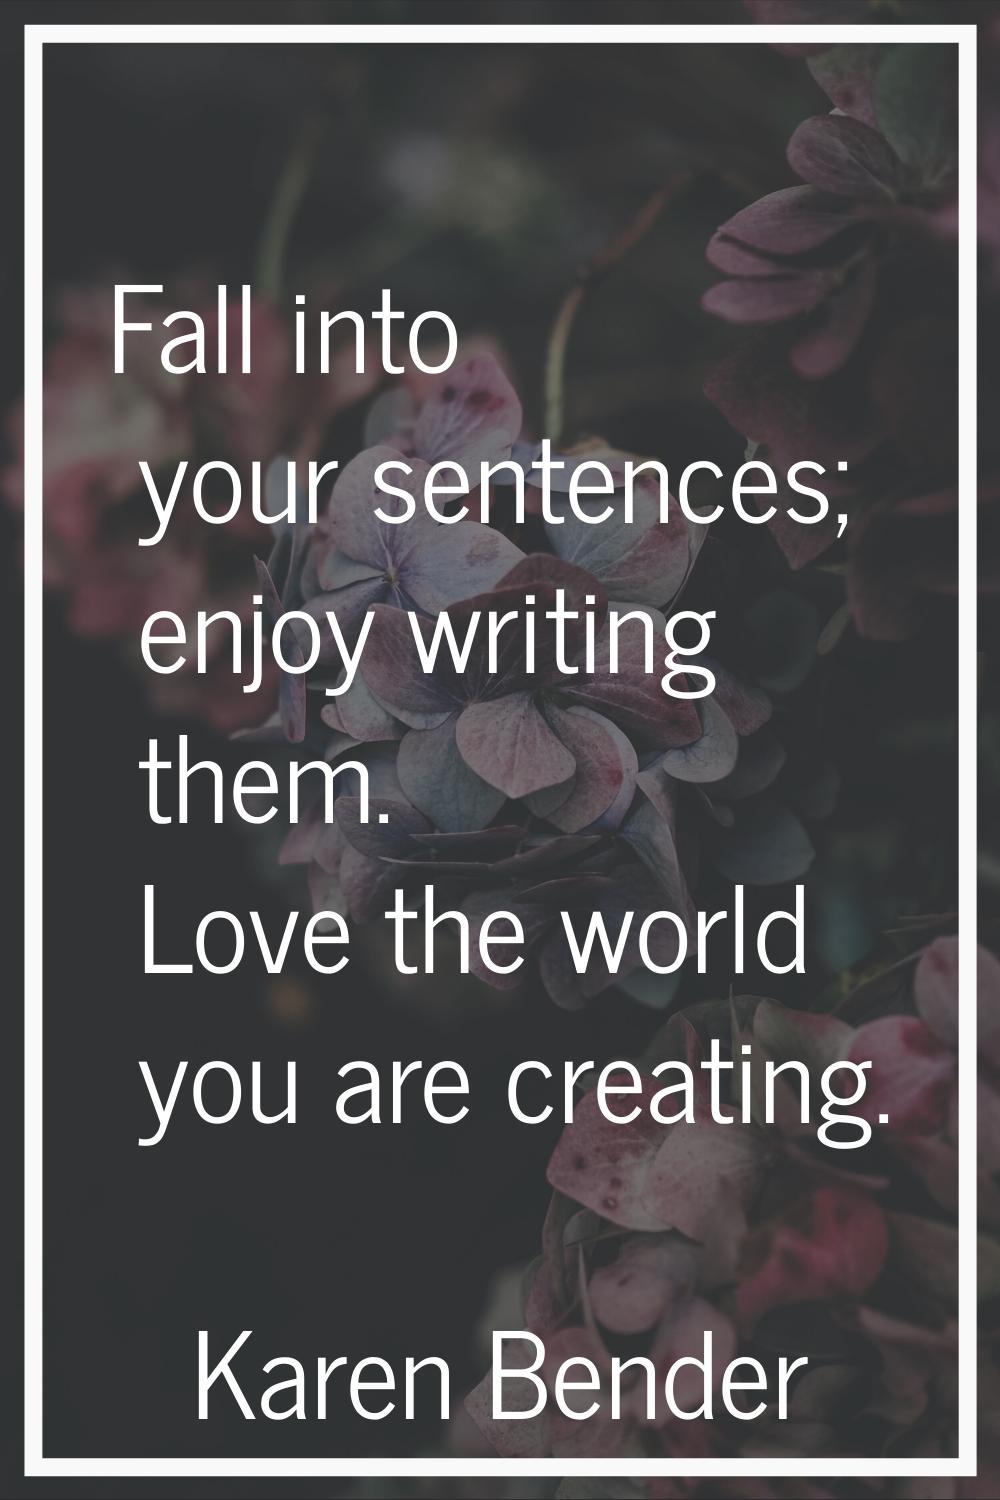 Fall into your sentences; enjoy writing them. Love the world you are creating.